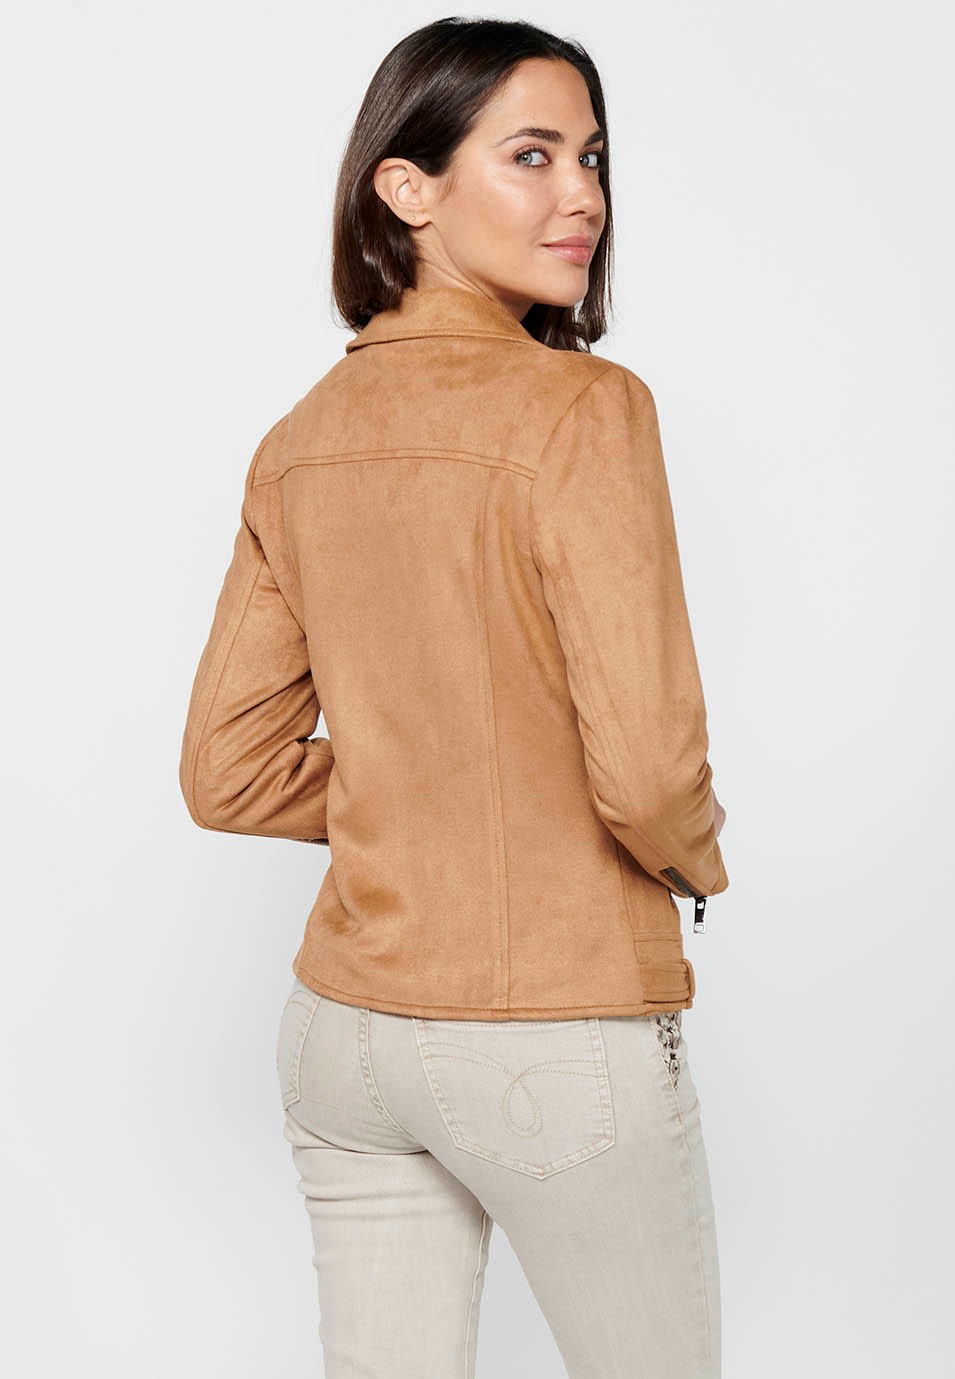 Camel Color Long Sleeve Jacket with Cross-Zip Closure with Lapel Collar and Pockets for Women 5